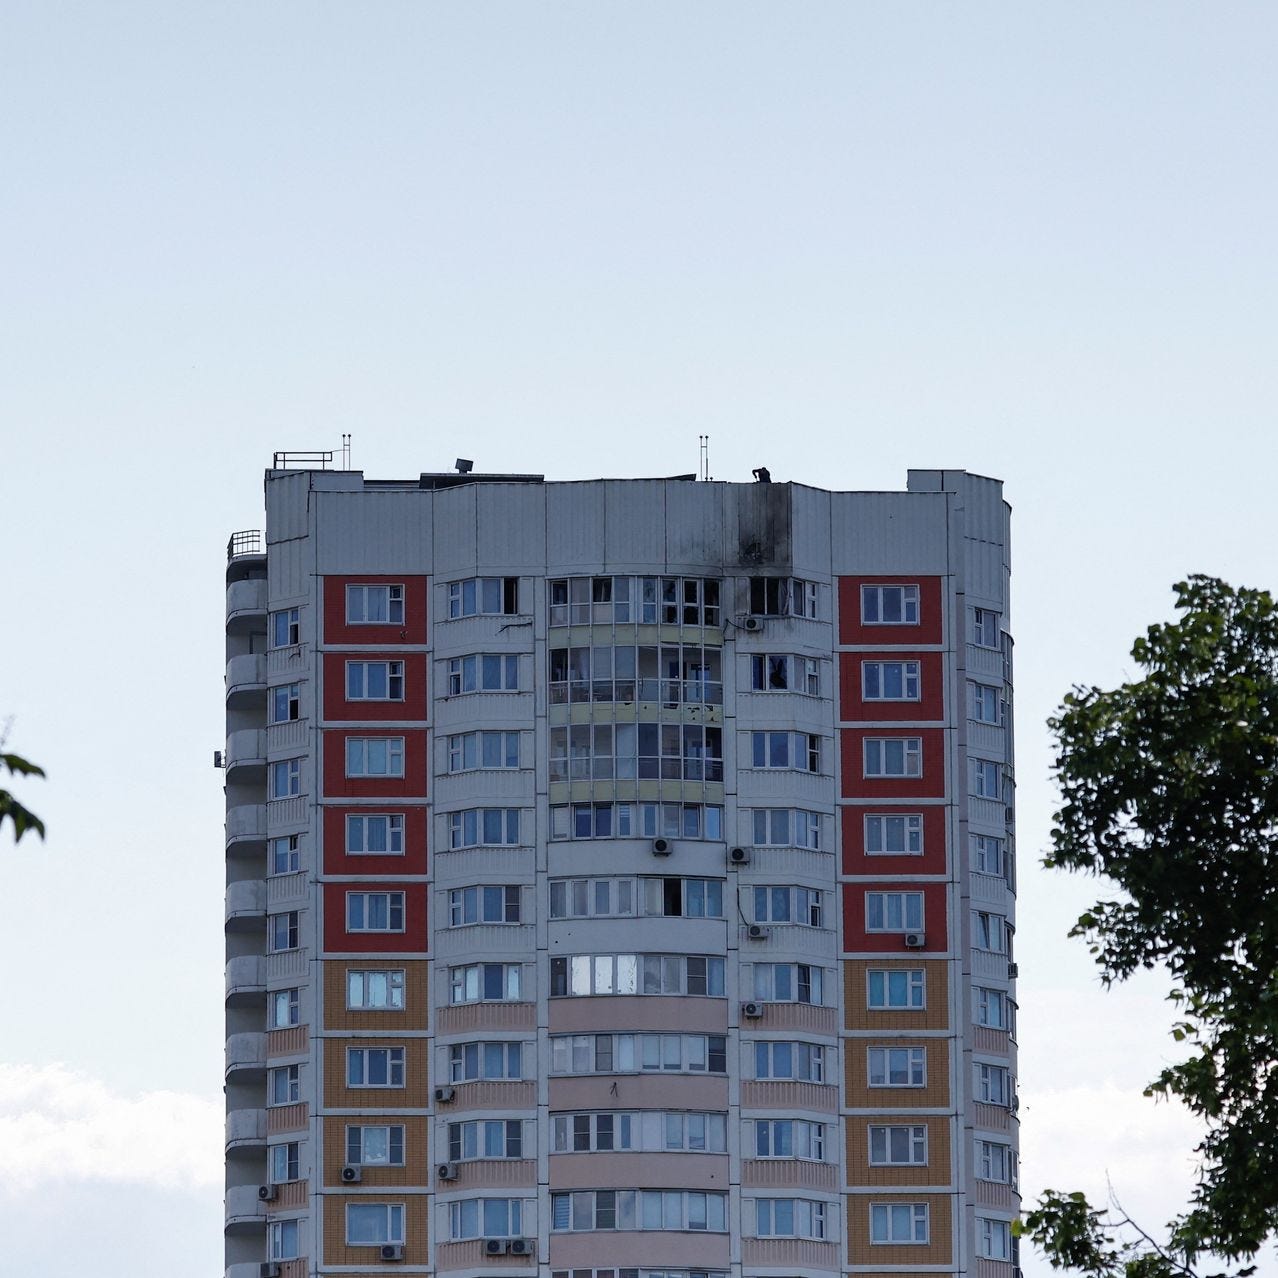 A multistory apartment block in Moscow was damaged following a drone attack.